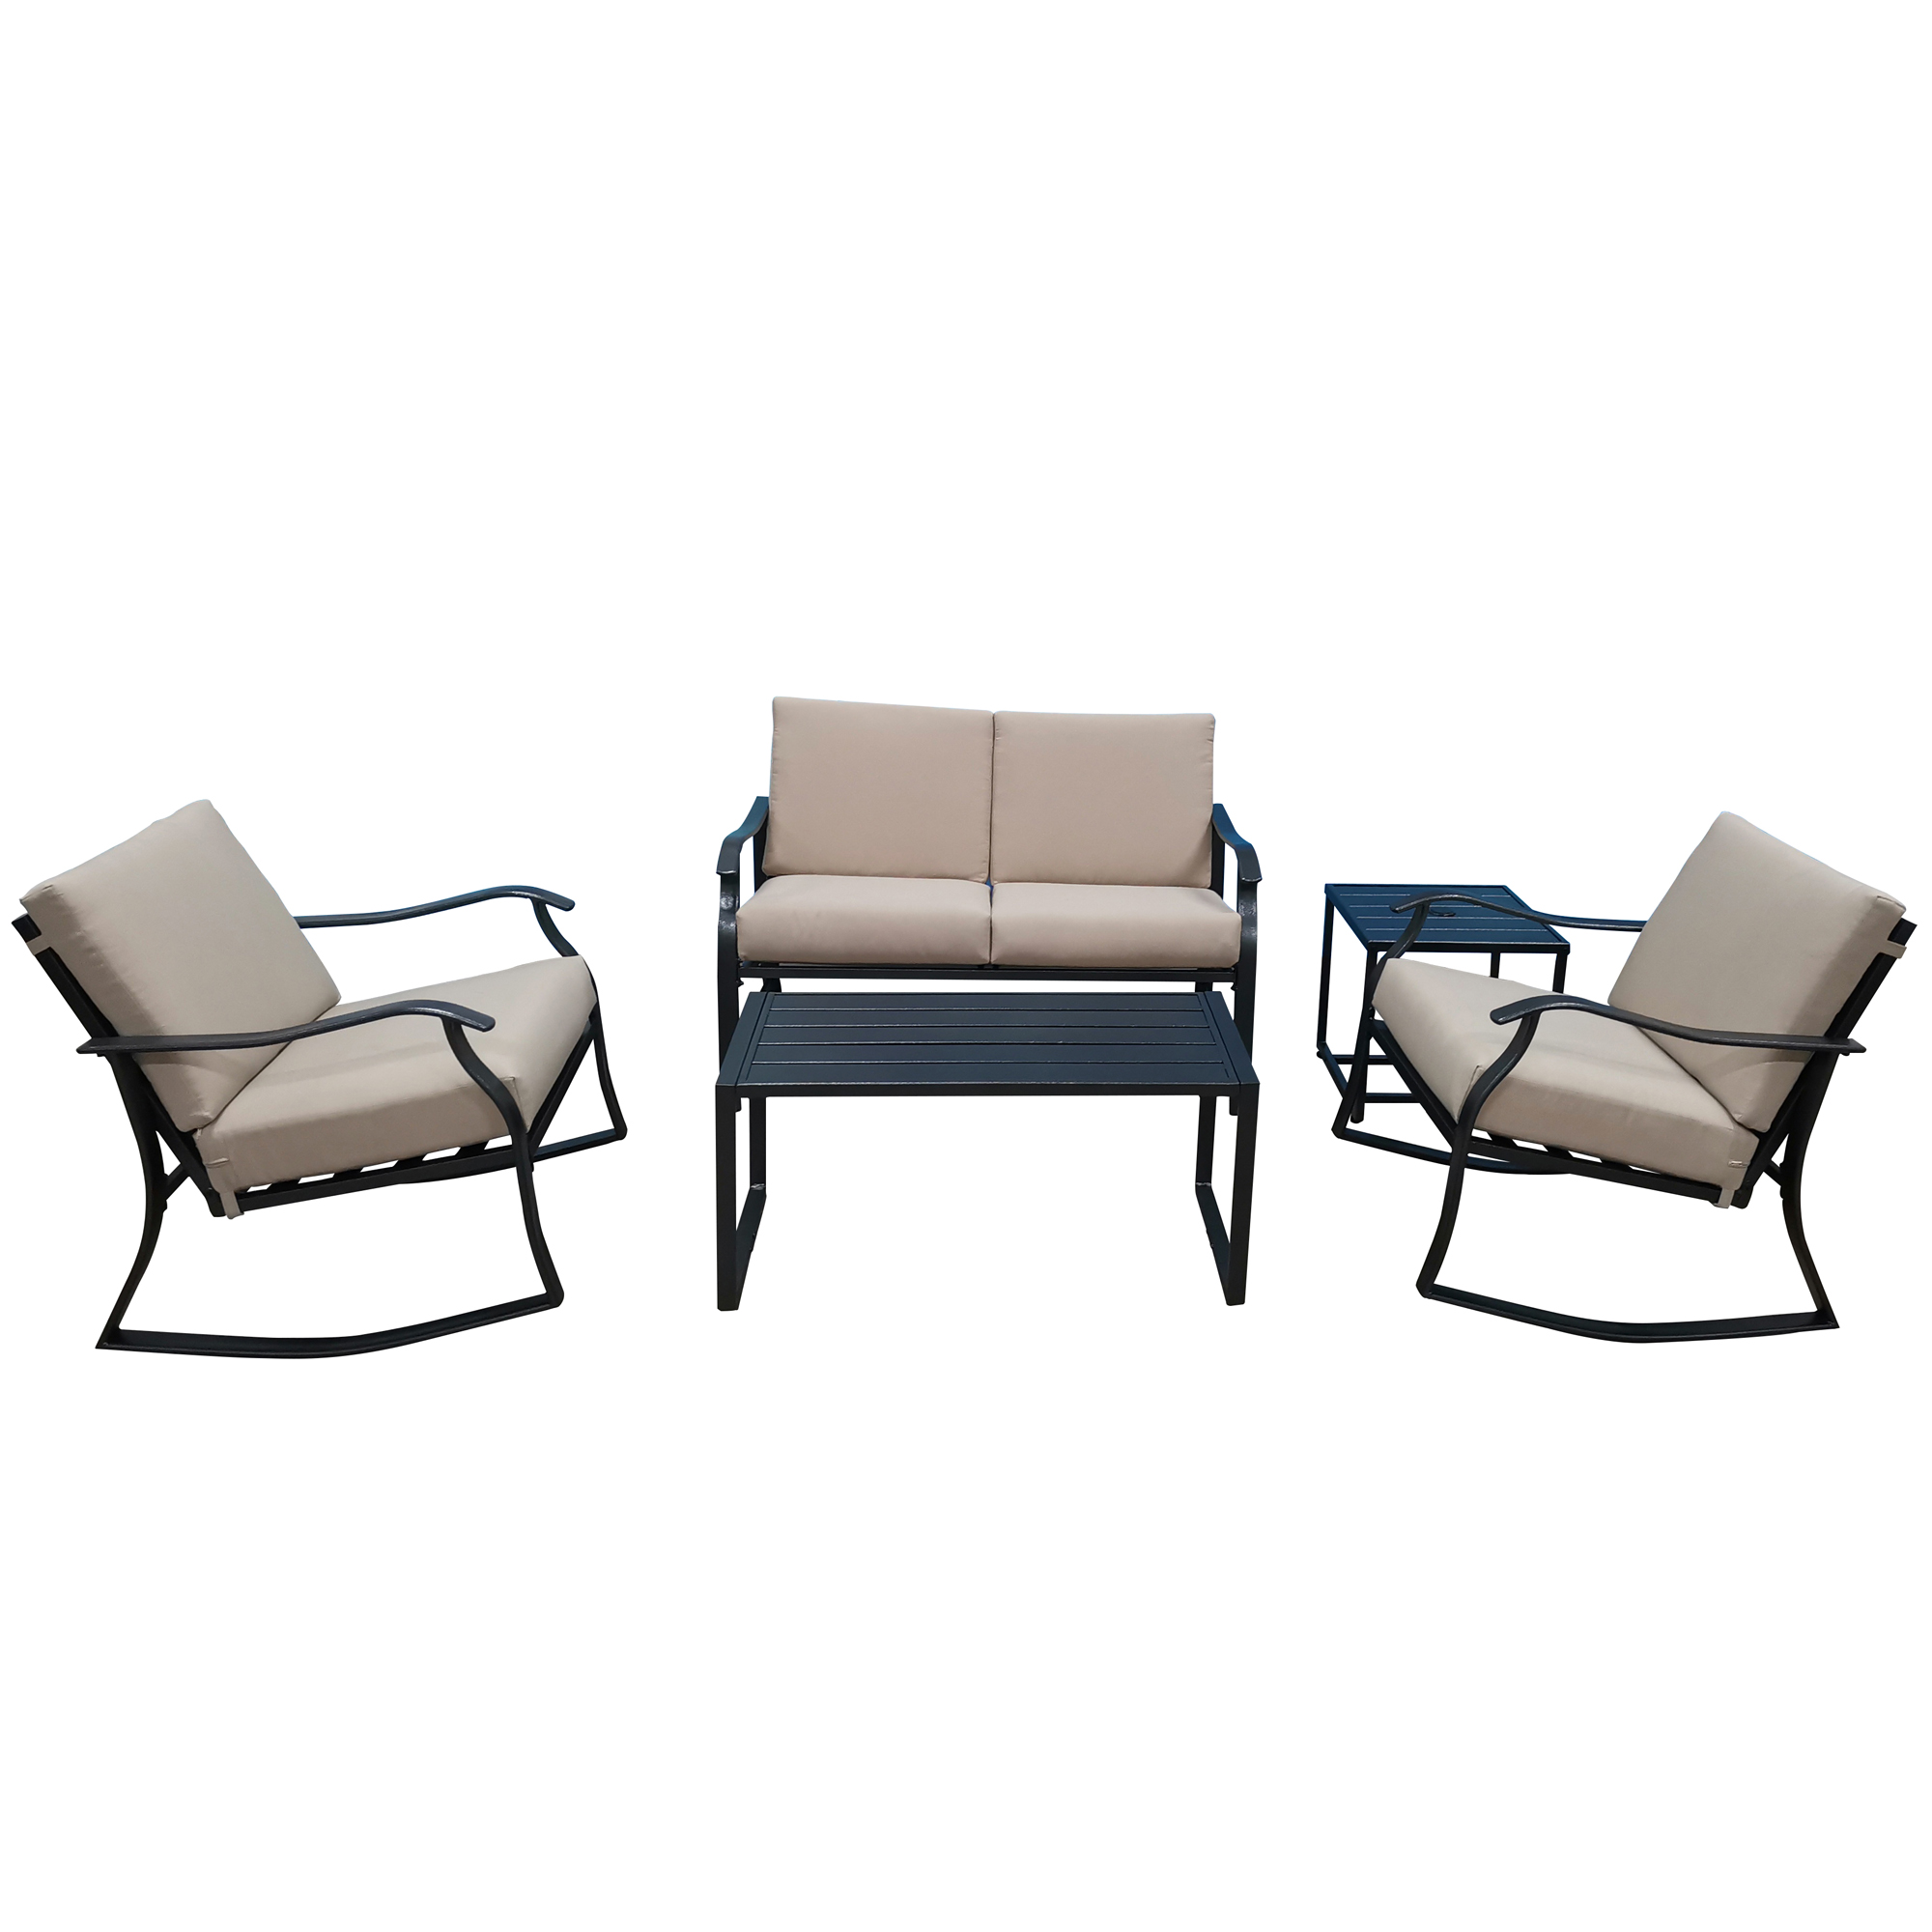 SYNGAR Patio Conversation Set of 5, Metal Outdoor Furniture with 2 Rocking Chairs, Patio Coffee Table, End Table, Loveseat and 4 Chairs Cushions for Garden Backyard Lawn, Beige, LJ3131 - image 3 of 9